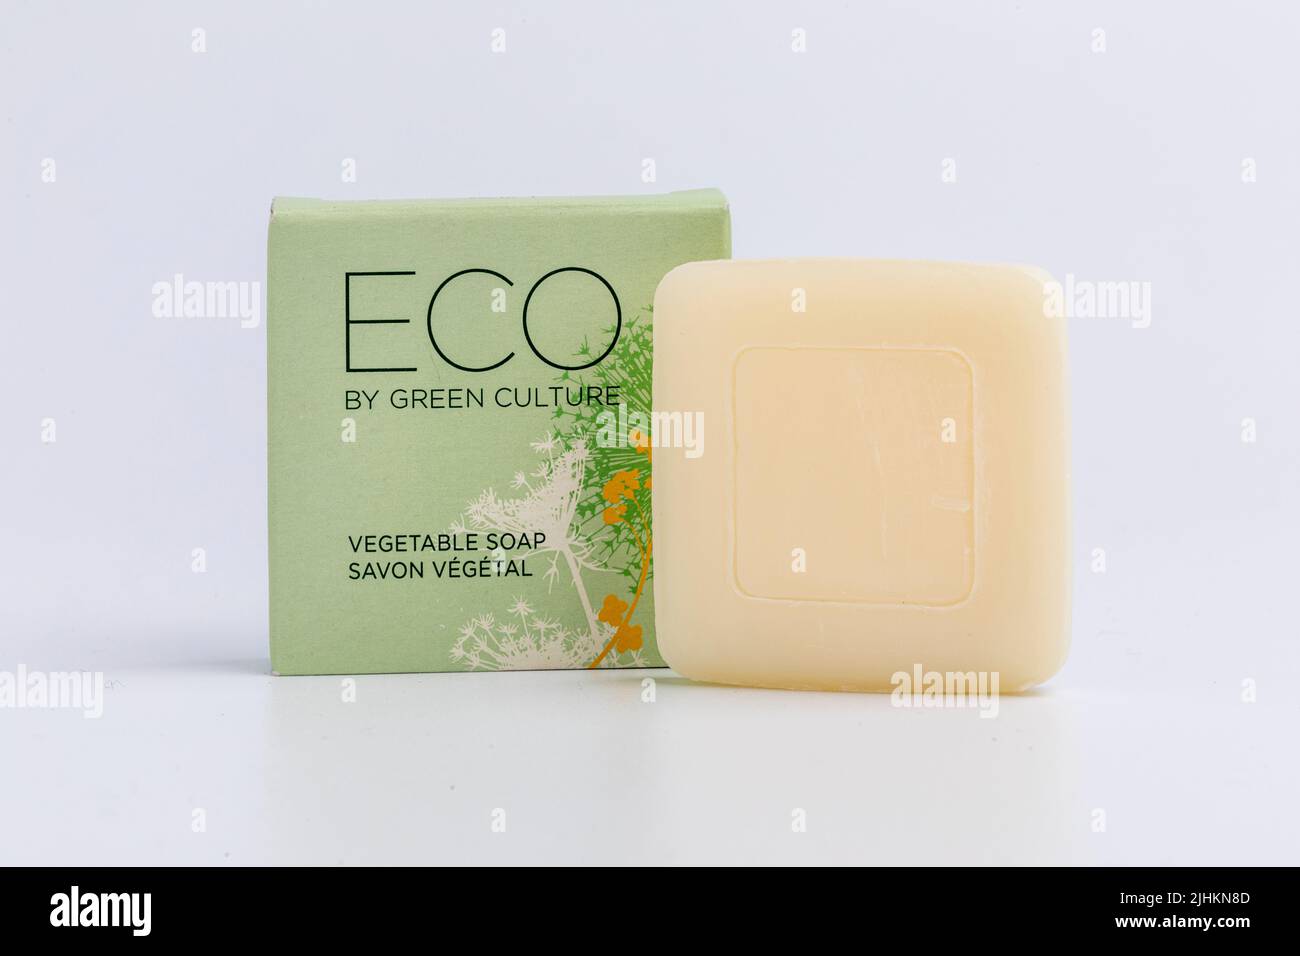 A box and bare of Eco Soap by Green Culture Stock Photo